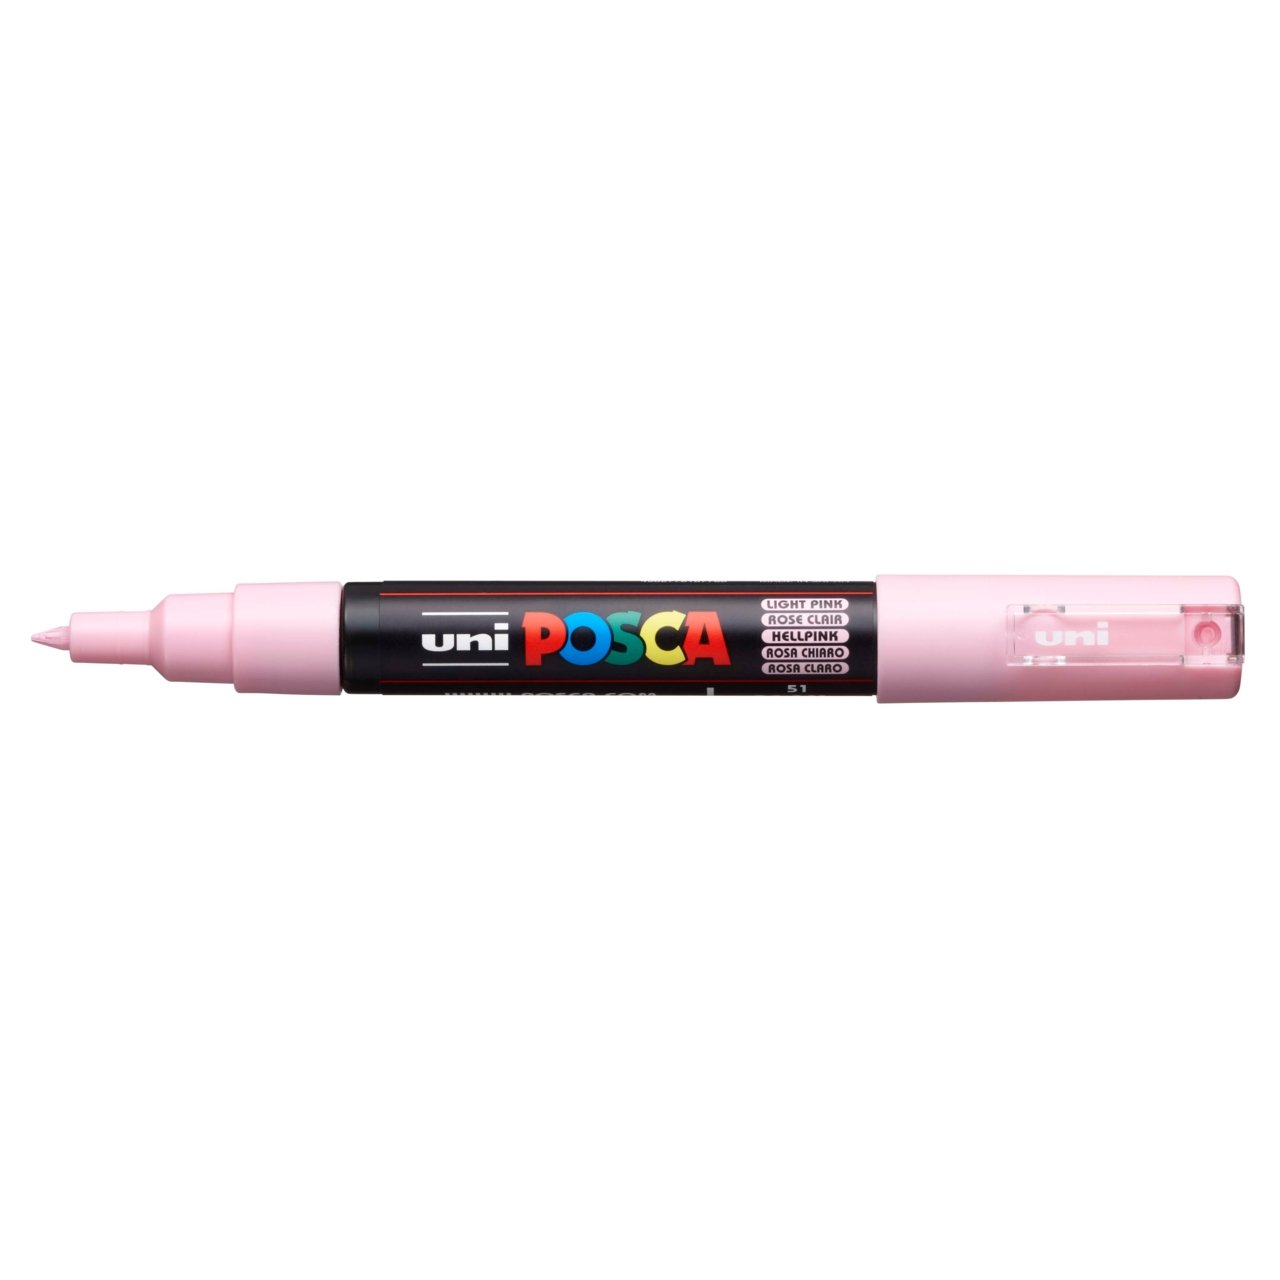 TRACER marker pens - review 